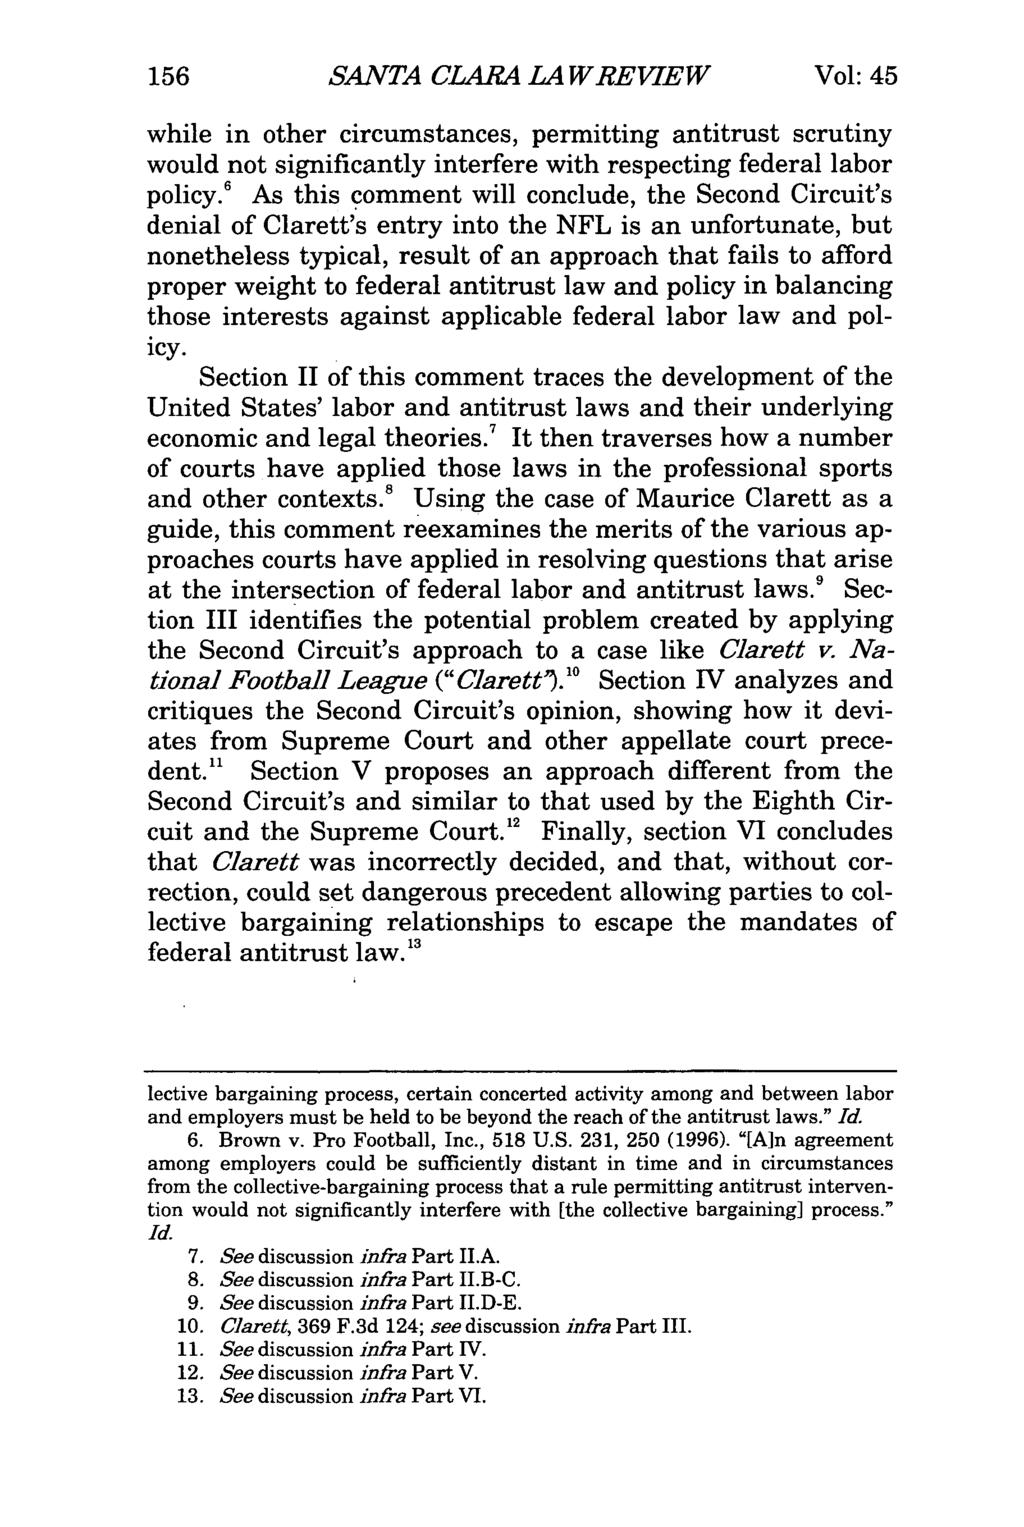 SANTA CLARA LA W REVIEW Vol: 45 while in other circumstances, permitting antitrust scrutiny would not significantly interfere with respecting federal labor policy.